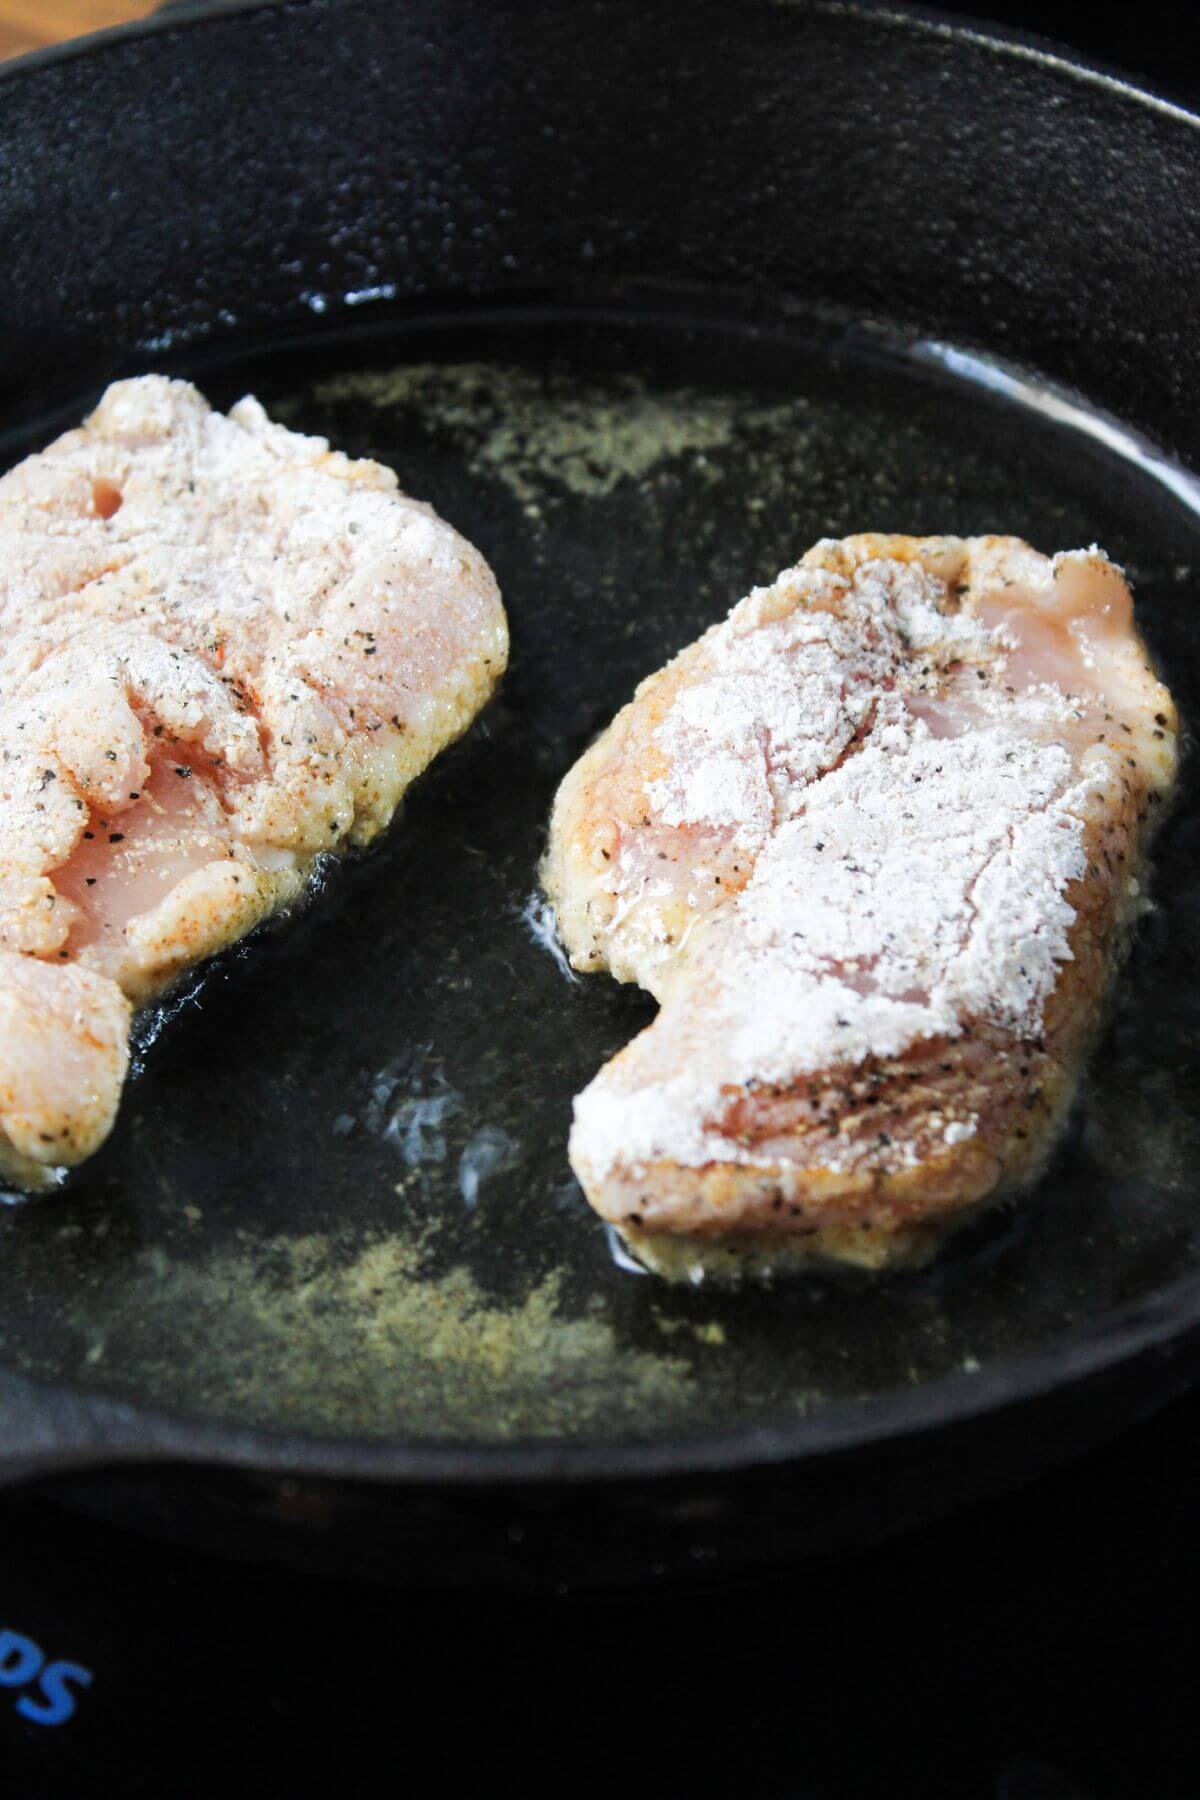 Two pieces of chicken are being cooked in a frying pan.